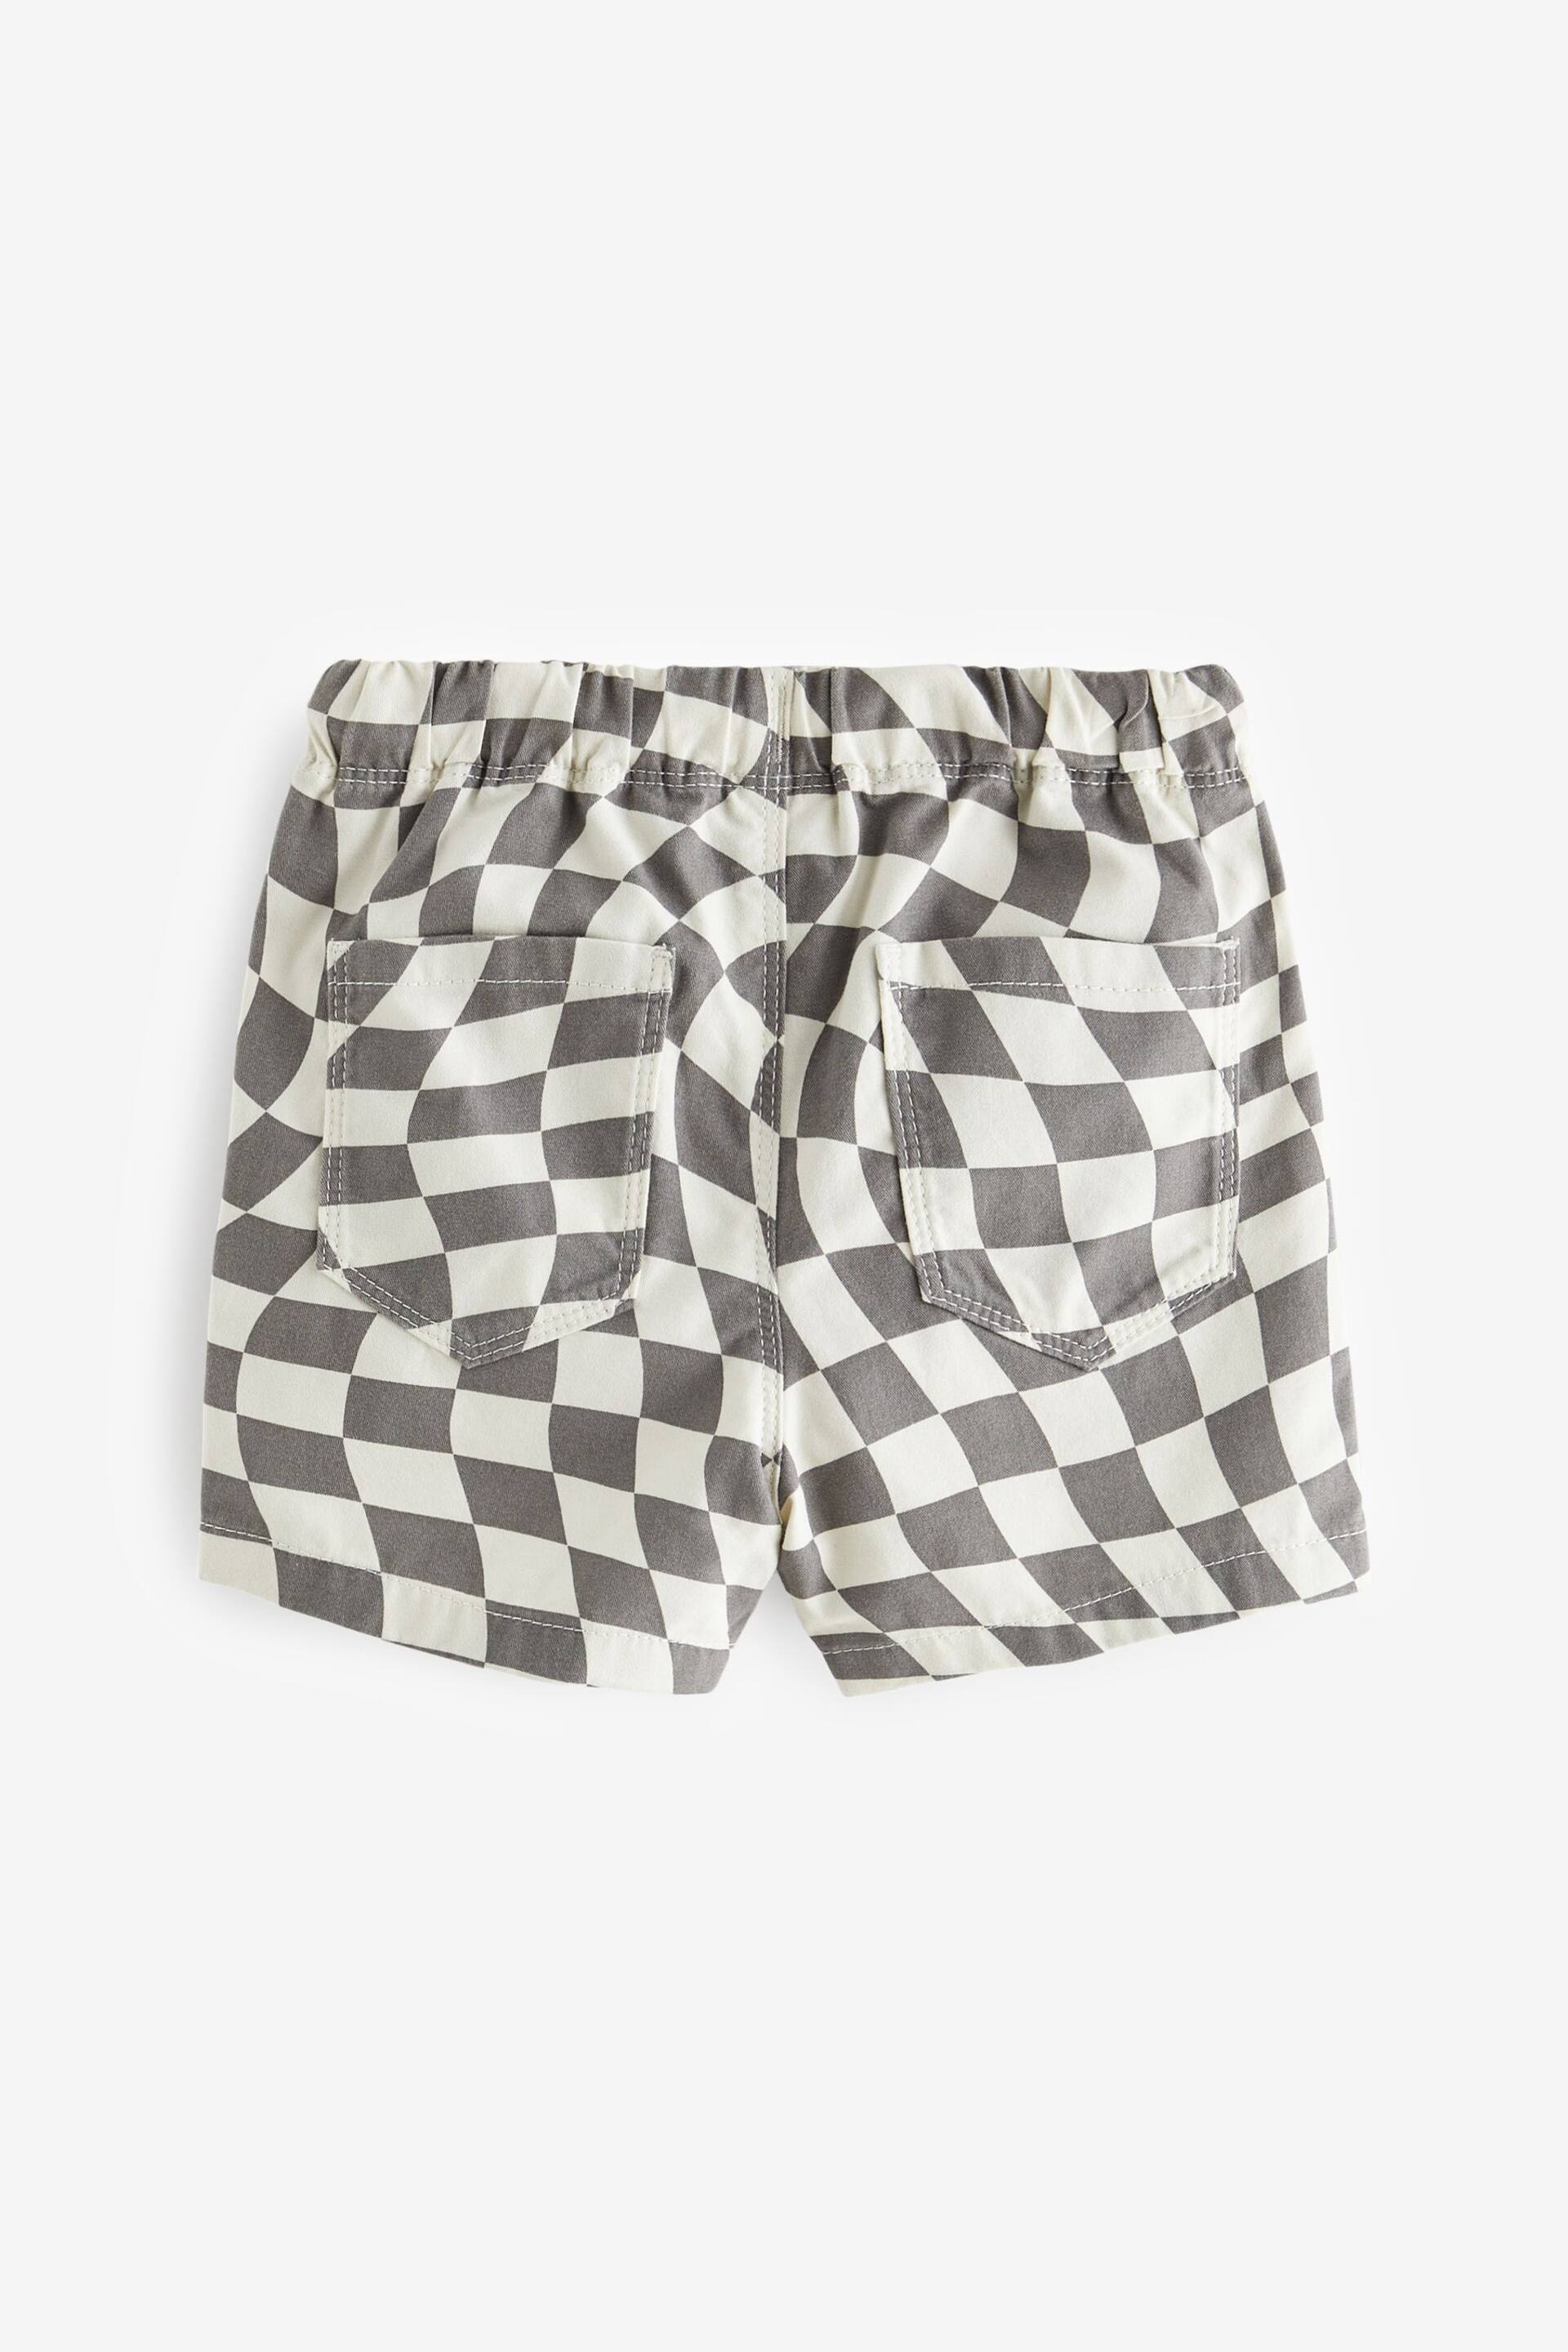 Monochrome Checkerboard Pull-On Shorts (3mths-7yrs) - Image 5 of 7